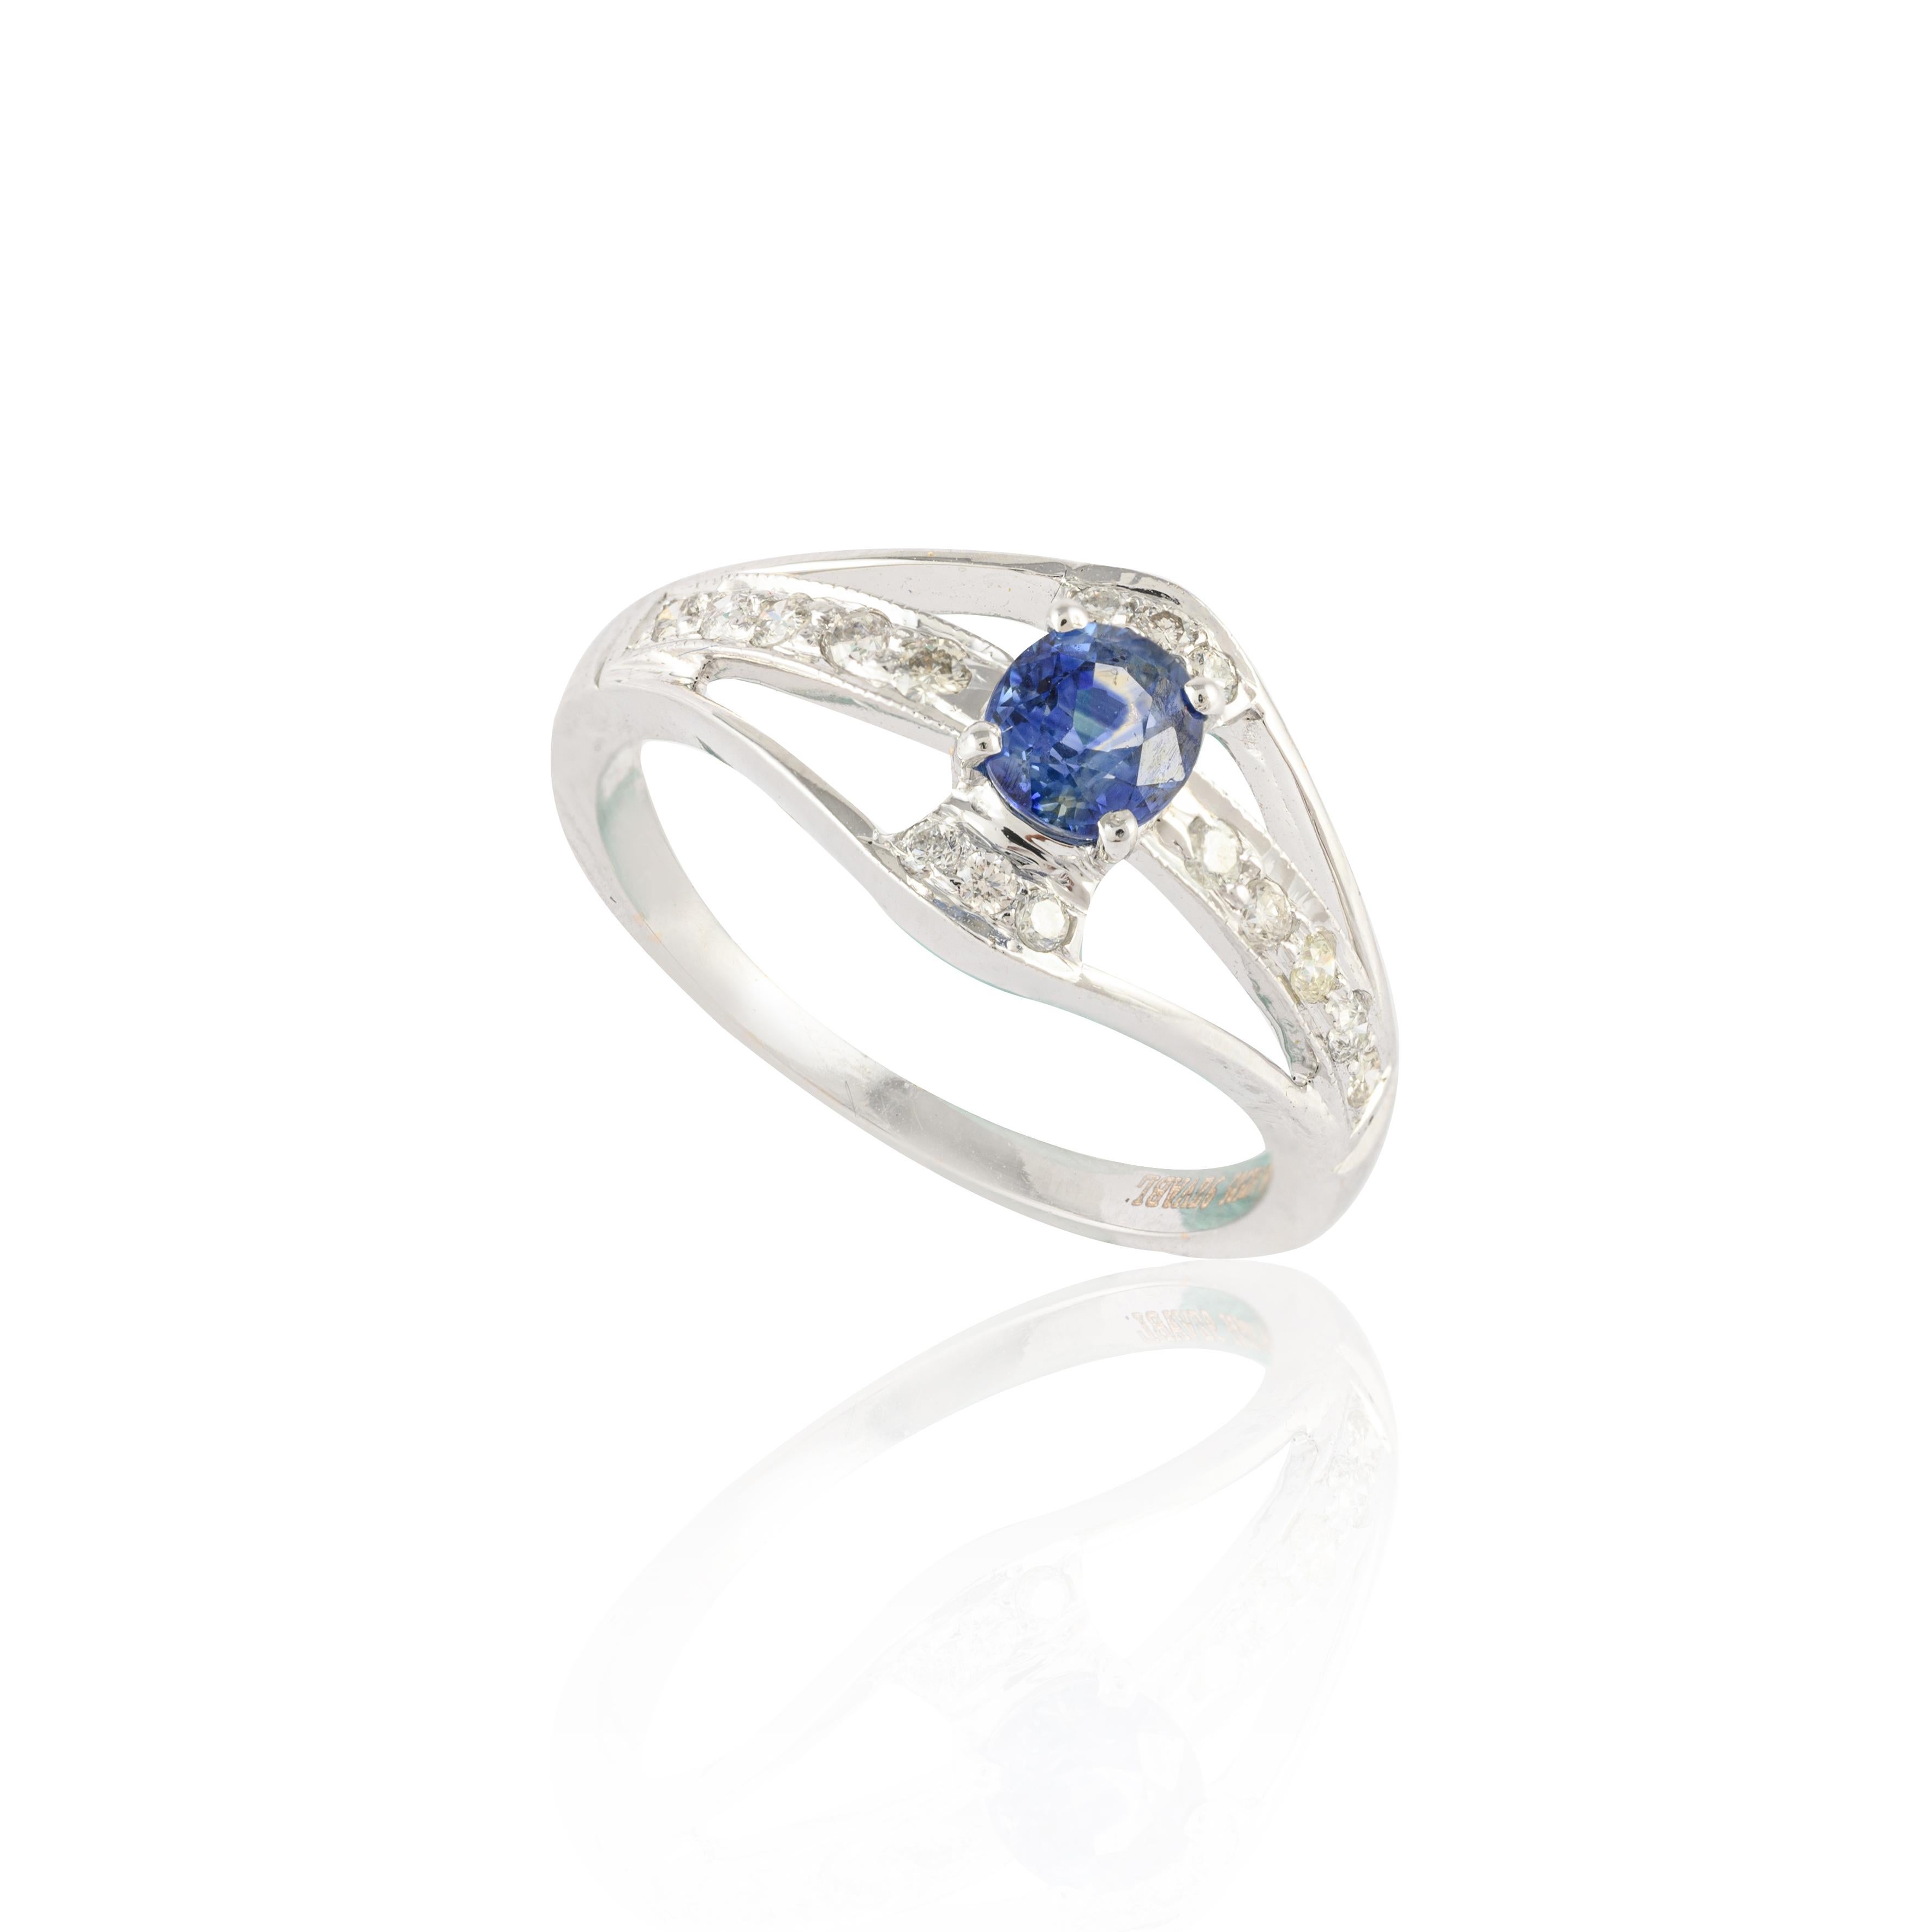 For Sale:  Elegant Diamond and Blue Sapphire Ring in 14k Solid White Gold  9